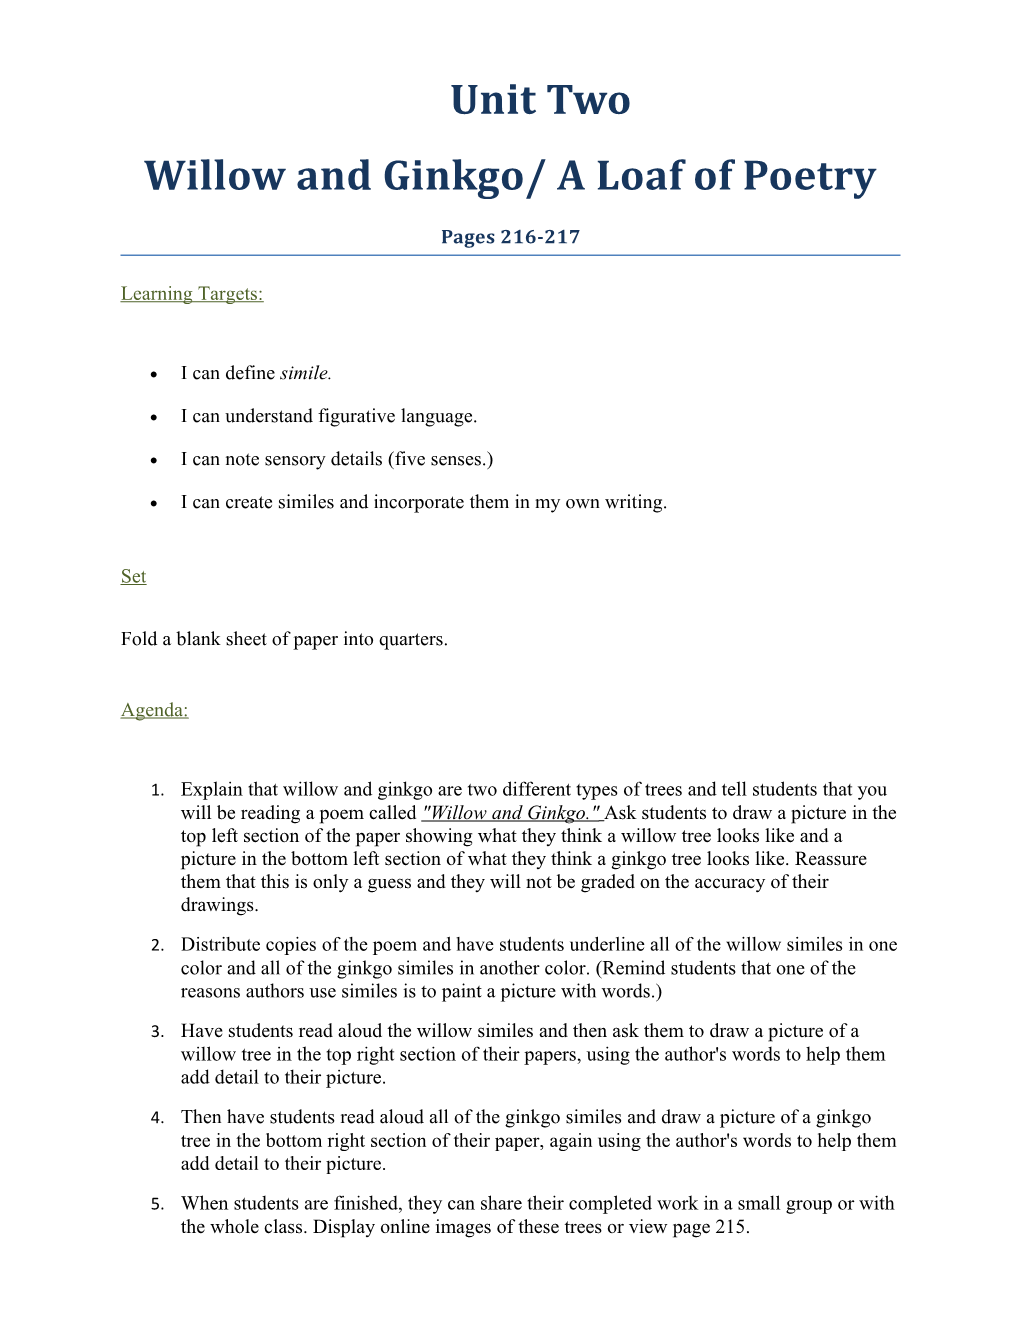 Willow and Ginkgo/ a Loaf of Poetry